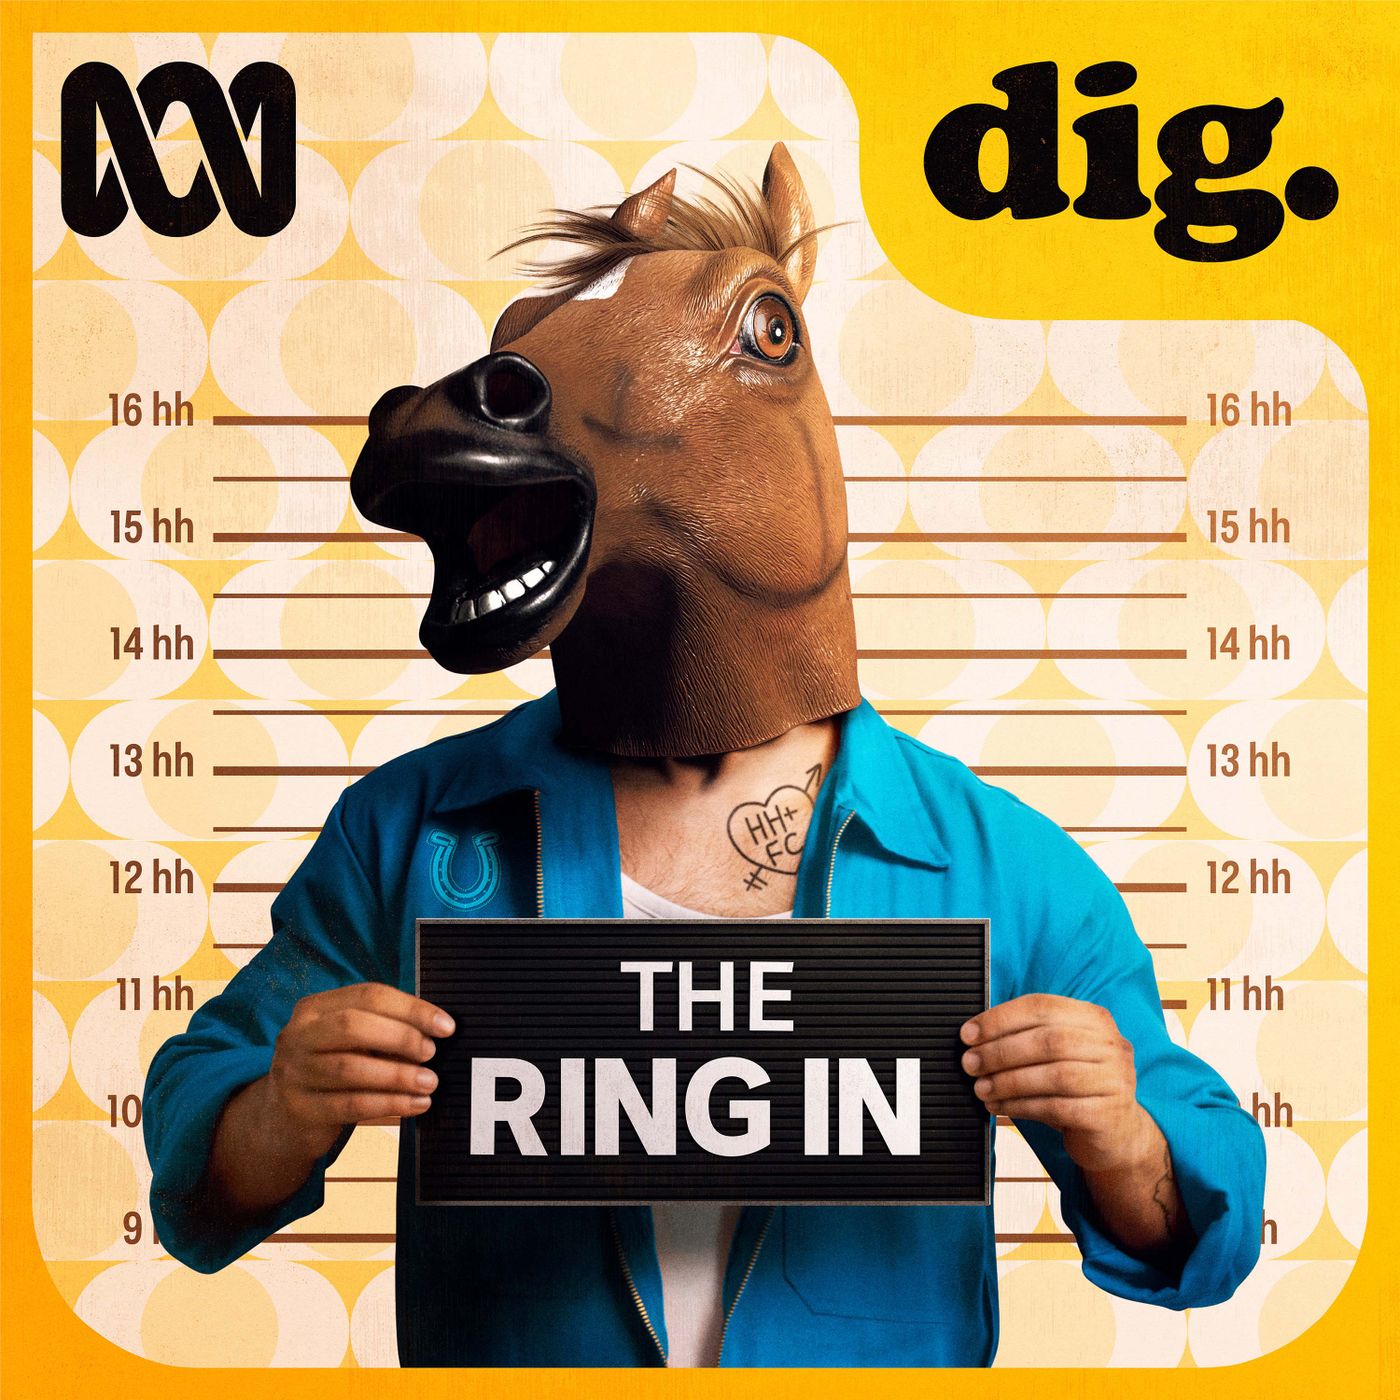 INTRODUCING - Dig: The Ring In